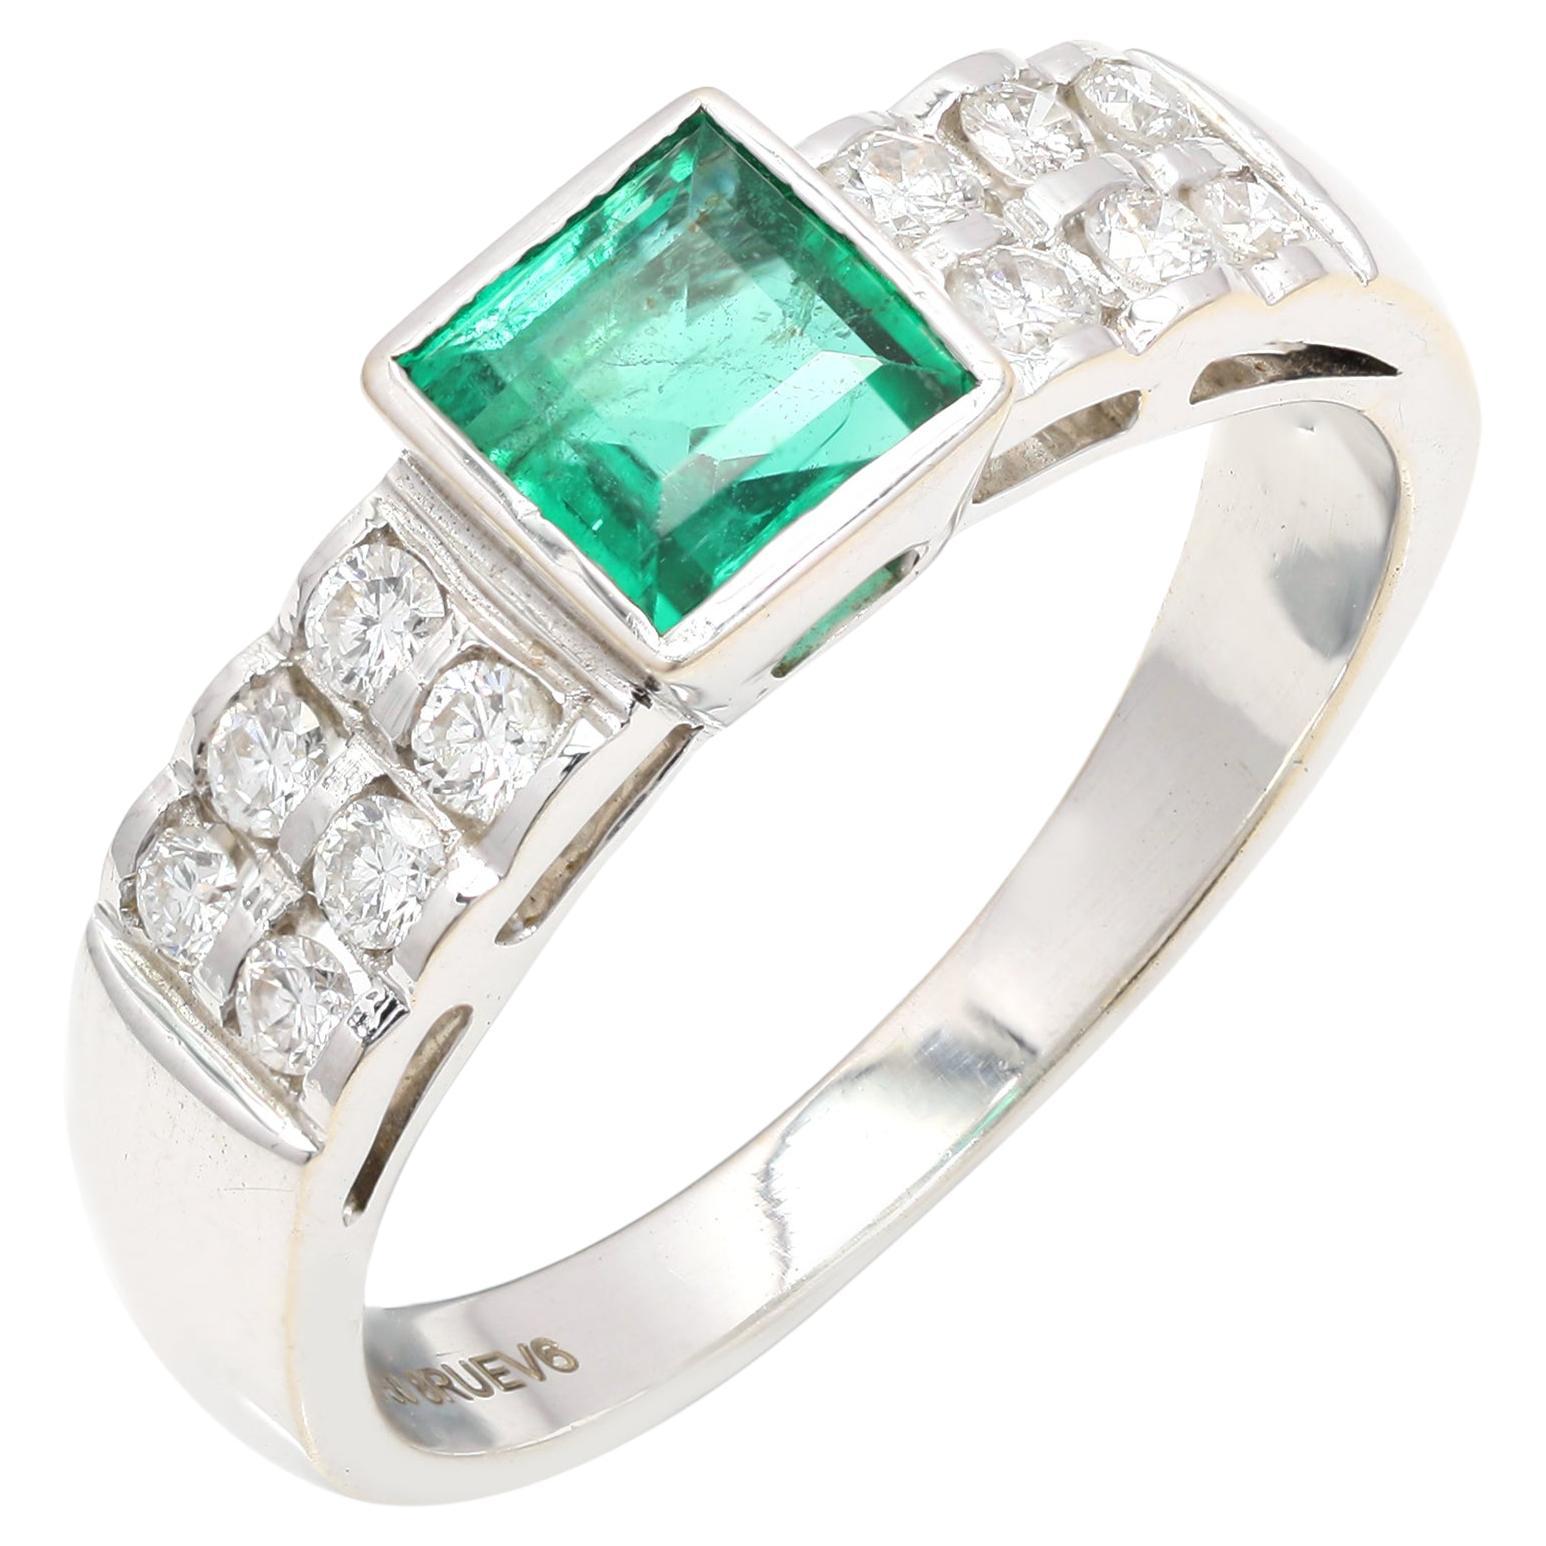 For Sale:  Unisex Diamond and Natural Emerald Engagement Band Ring in 18k White Gold